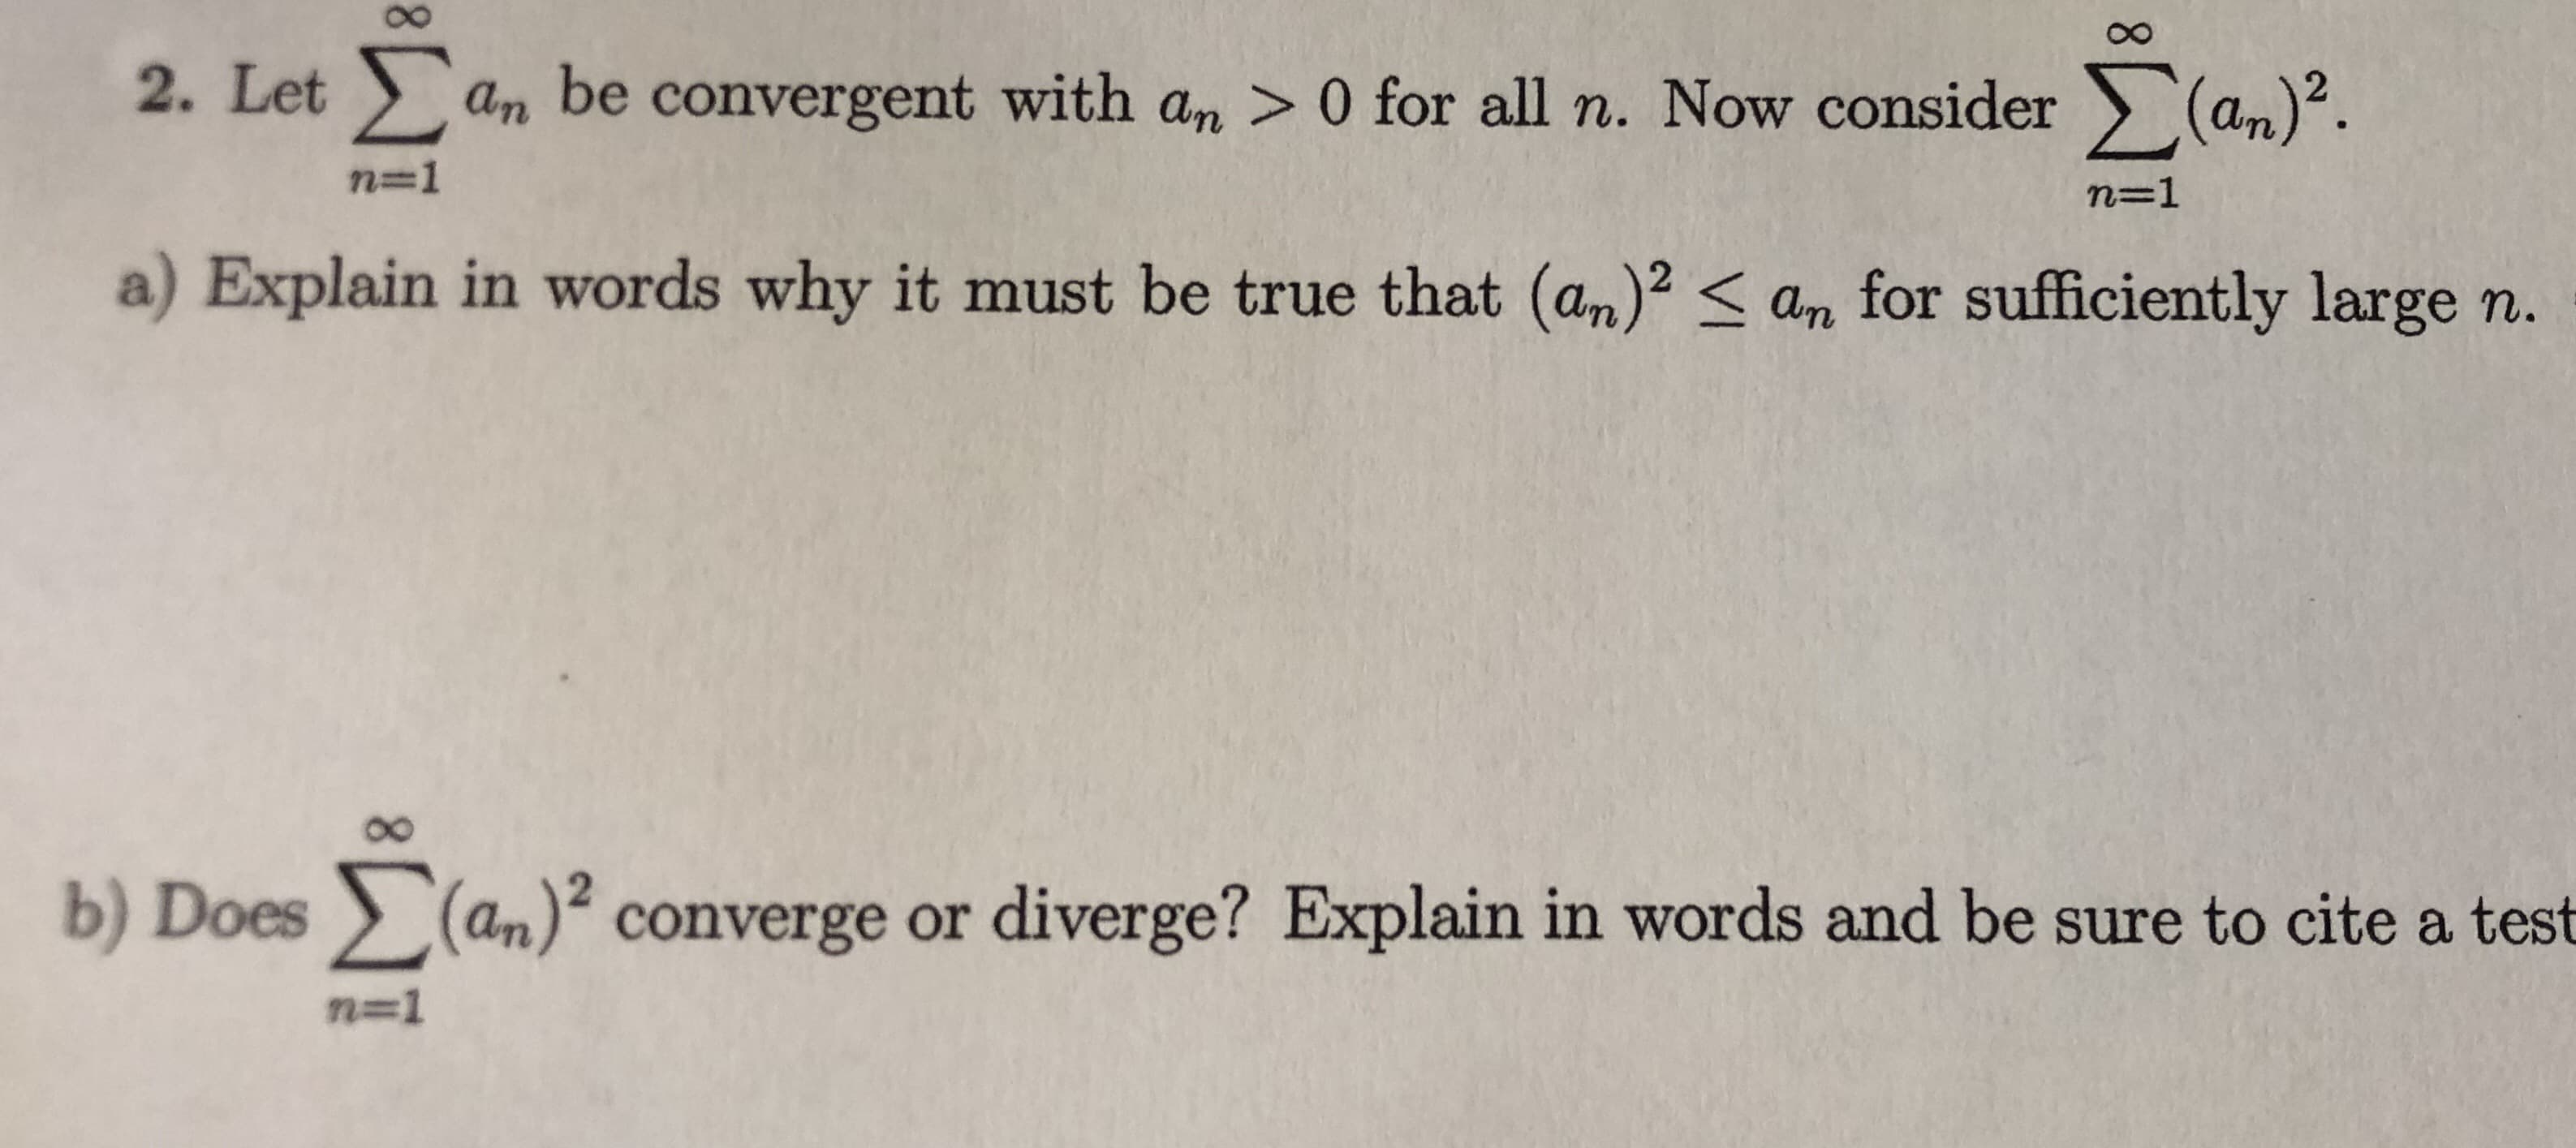 8.
2. Let an be convergent with an > 0 for all n. Now consider (an).
n=1
n=1
a) Explain in words why it must be true that (an)2 < an for sufficiently large n.
b) Does (an)² converge or diverge? Explain in words and be sure to cite a test
n=1
